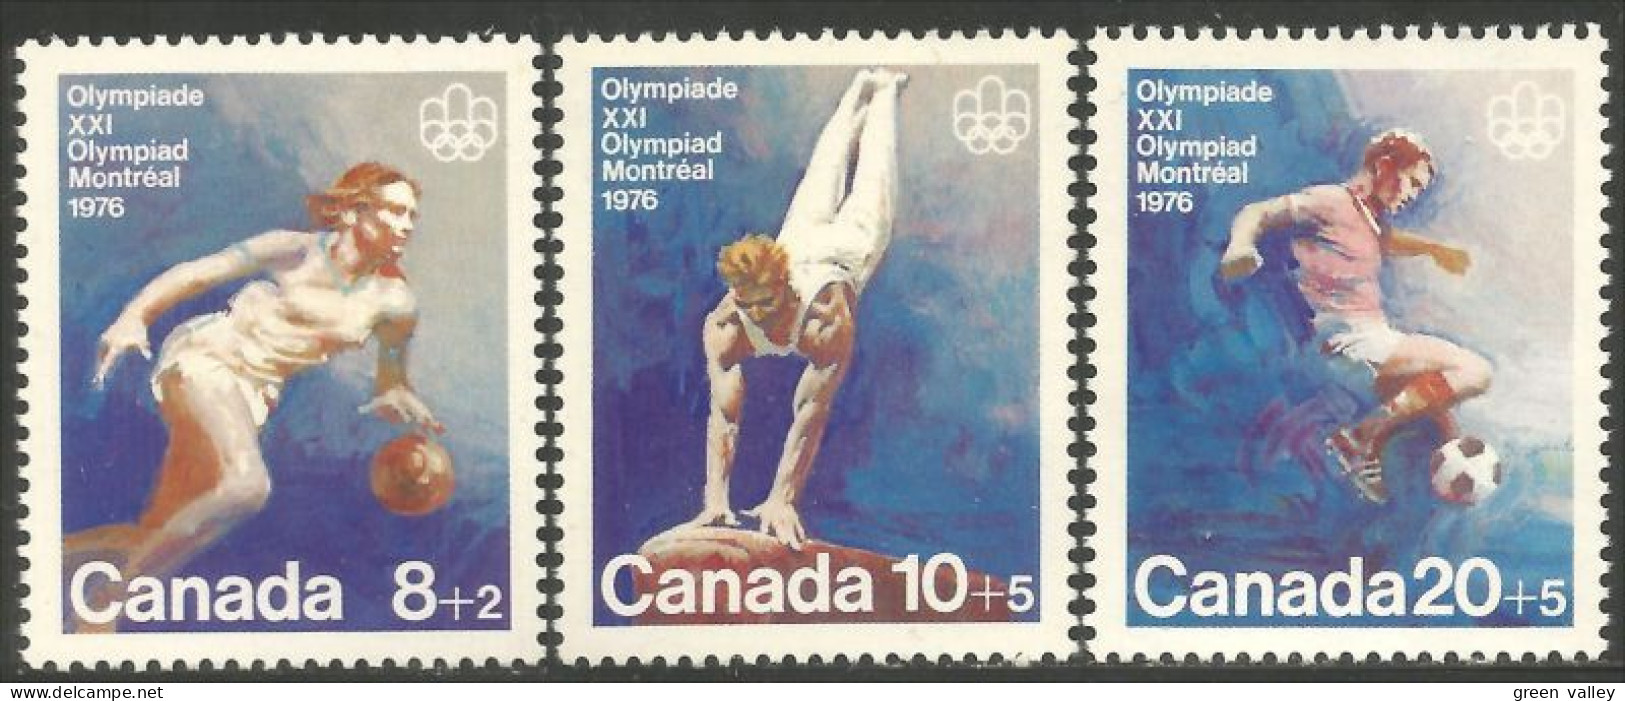 Canada Jeux Olympiques Montreal 1976 Olympic Games MNH ** Neuf SC (CB-10-12c) - Verano 1976: Montréal